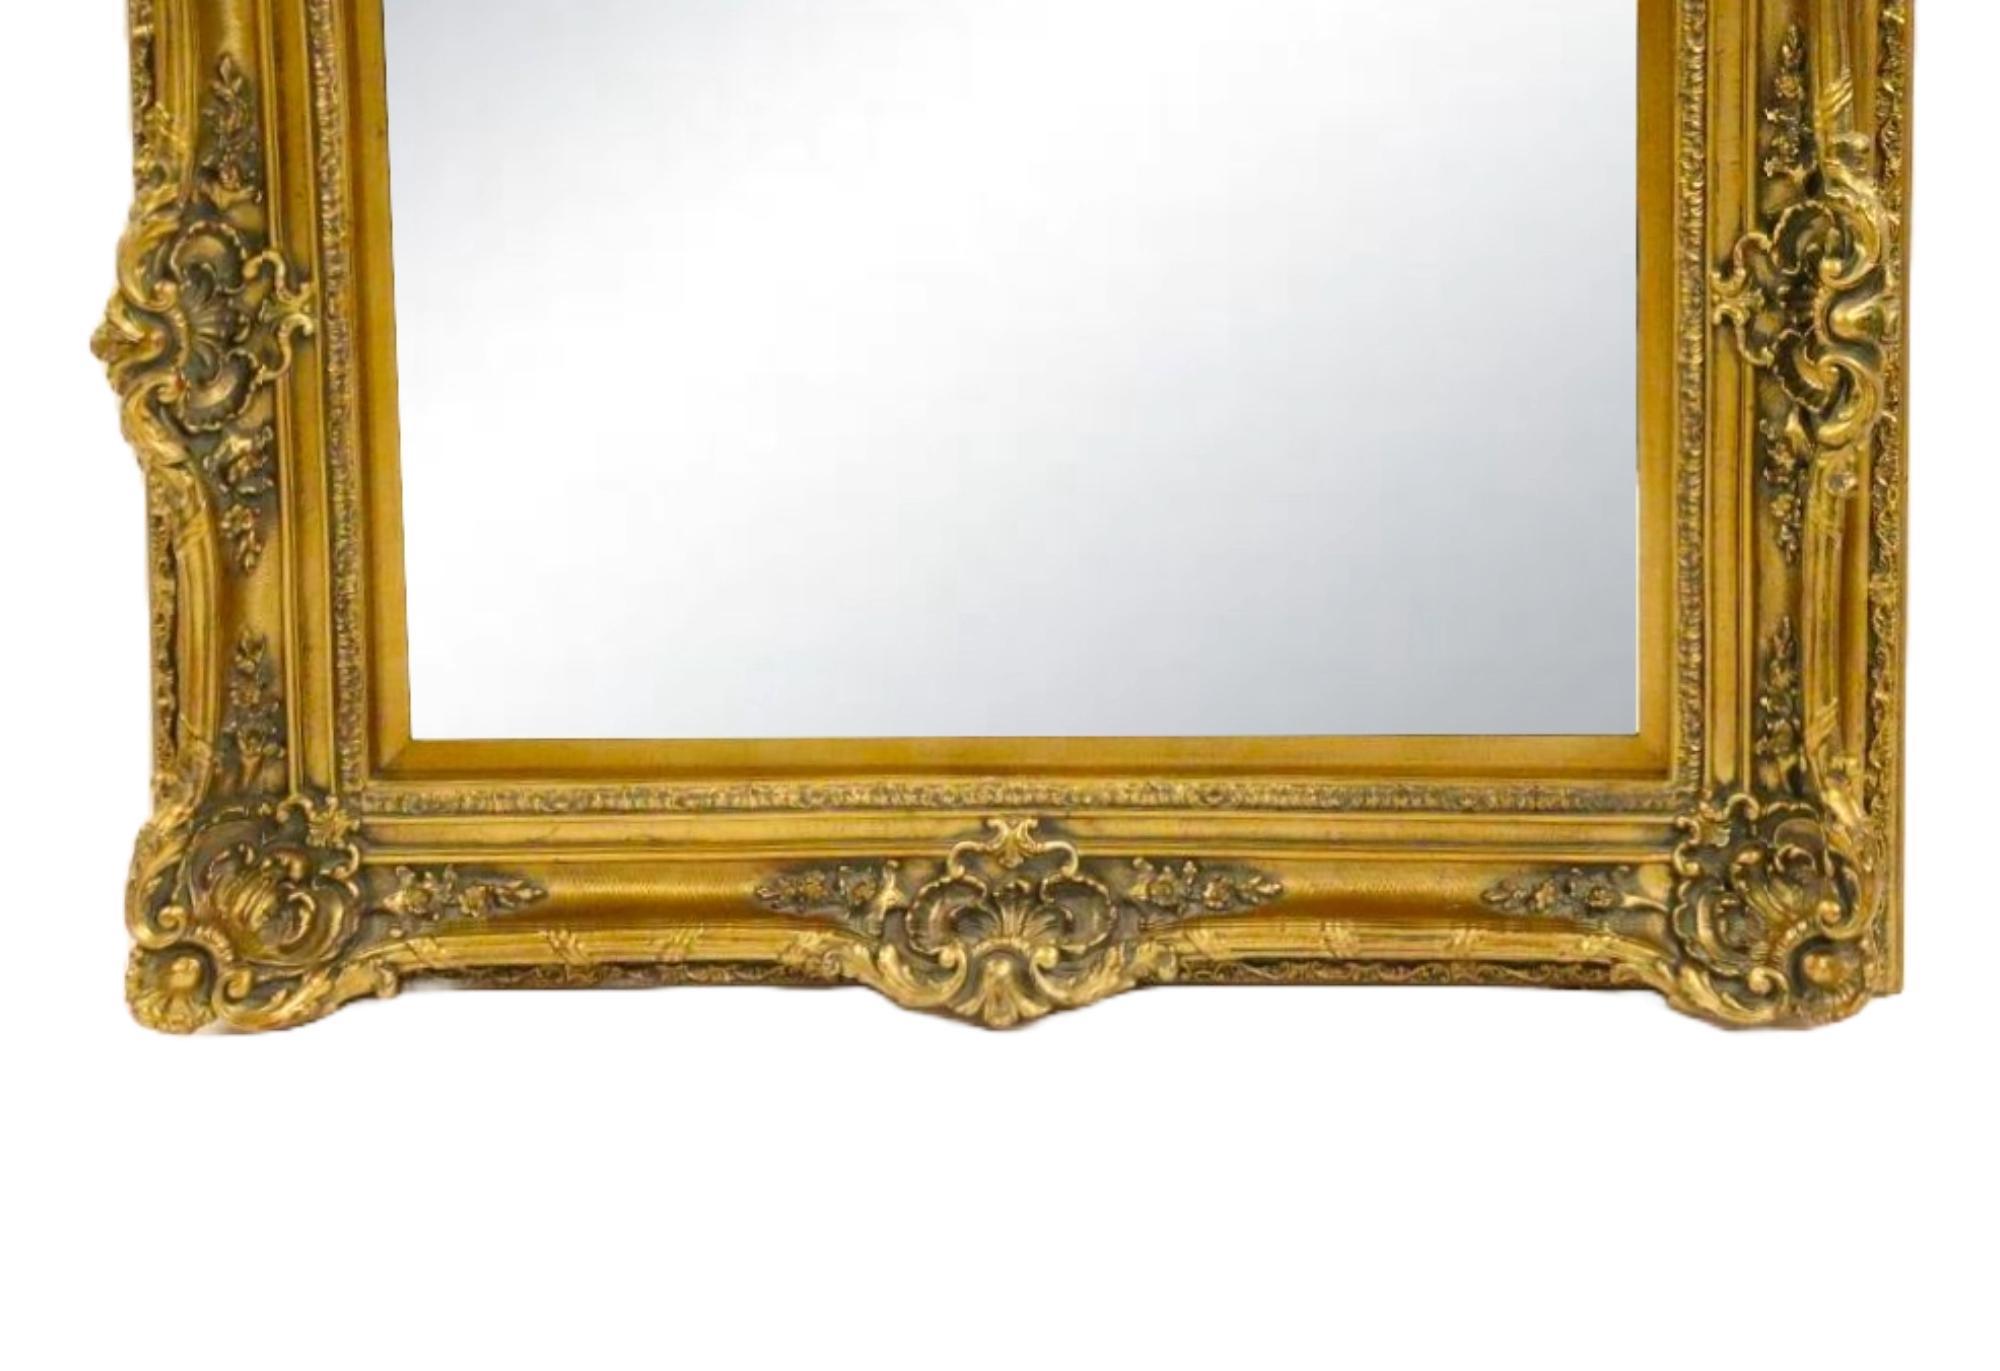 Elevate your home decor with this exquisite antique hand-carved giltwood framed wall mirror. The frame showcases a heavily decorated floral design, expertly crafted to create a stunning visual impact.
This large, Italian-quality mirror features a